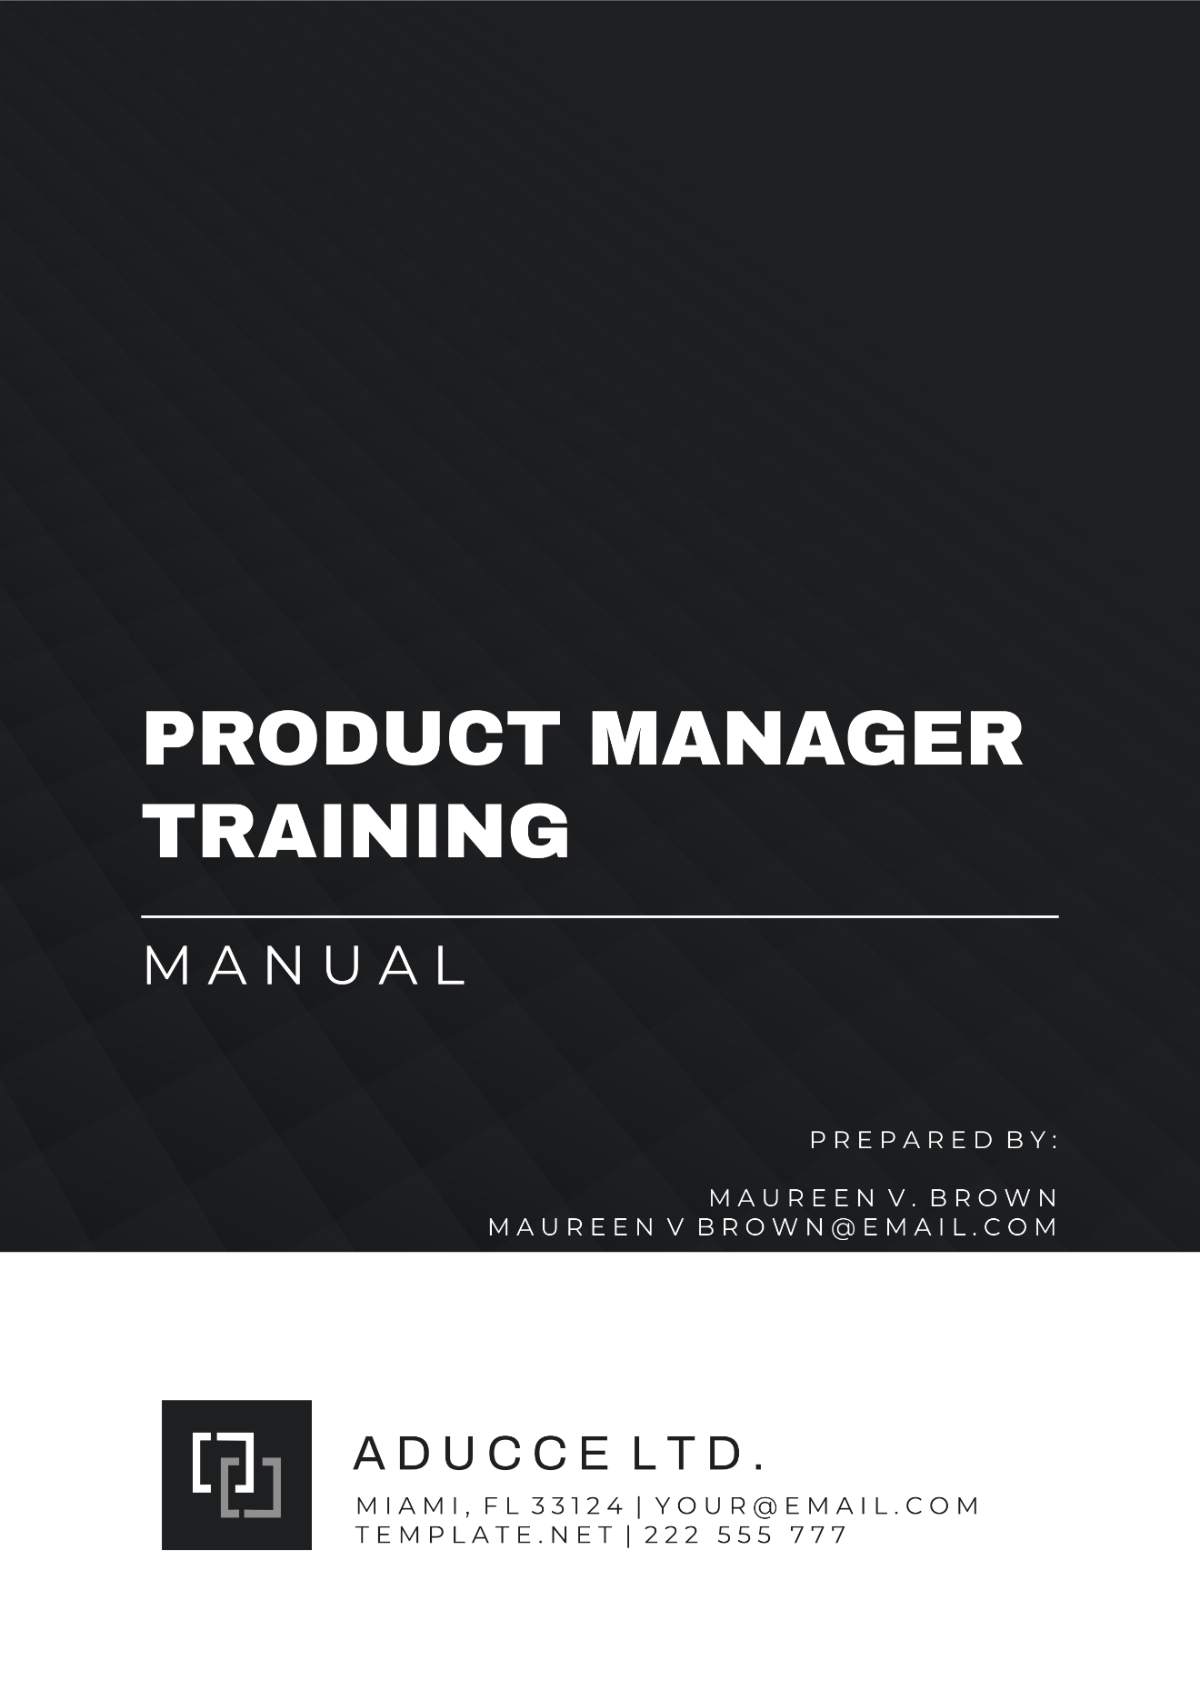 Product Manager Training Manual Template